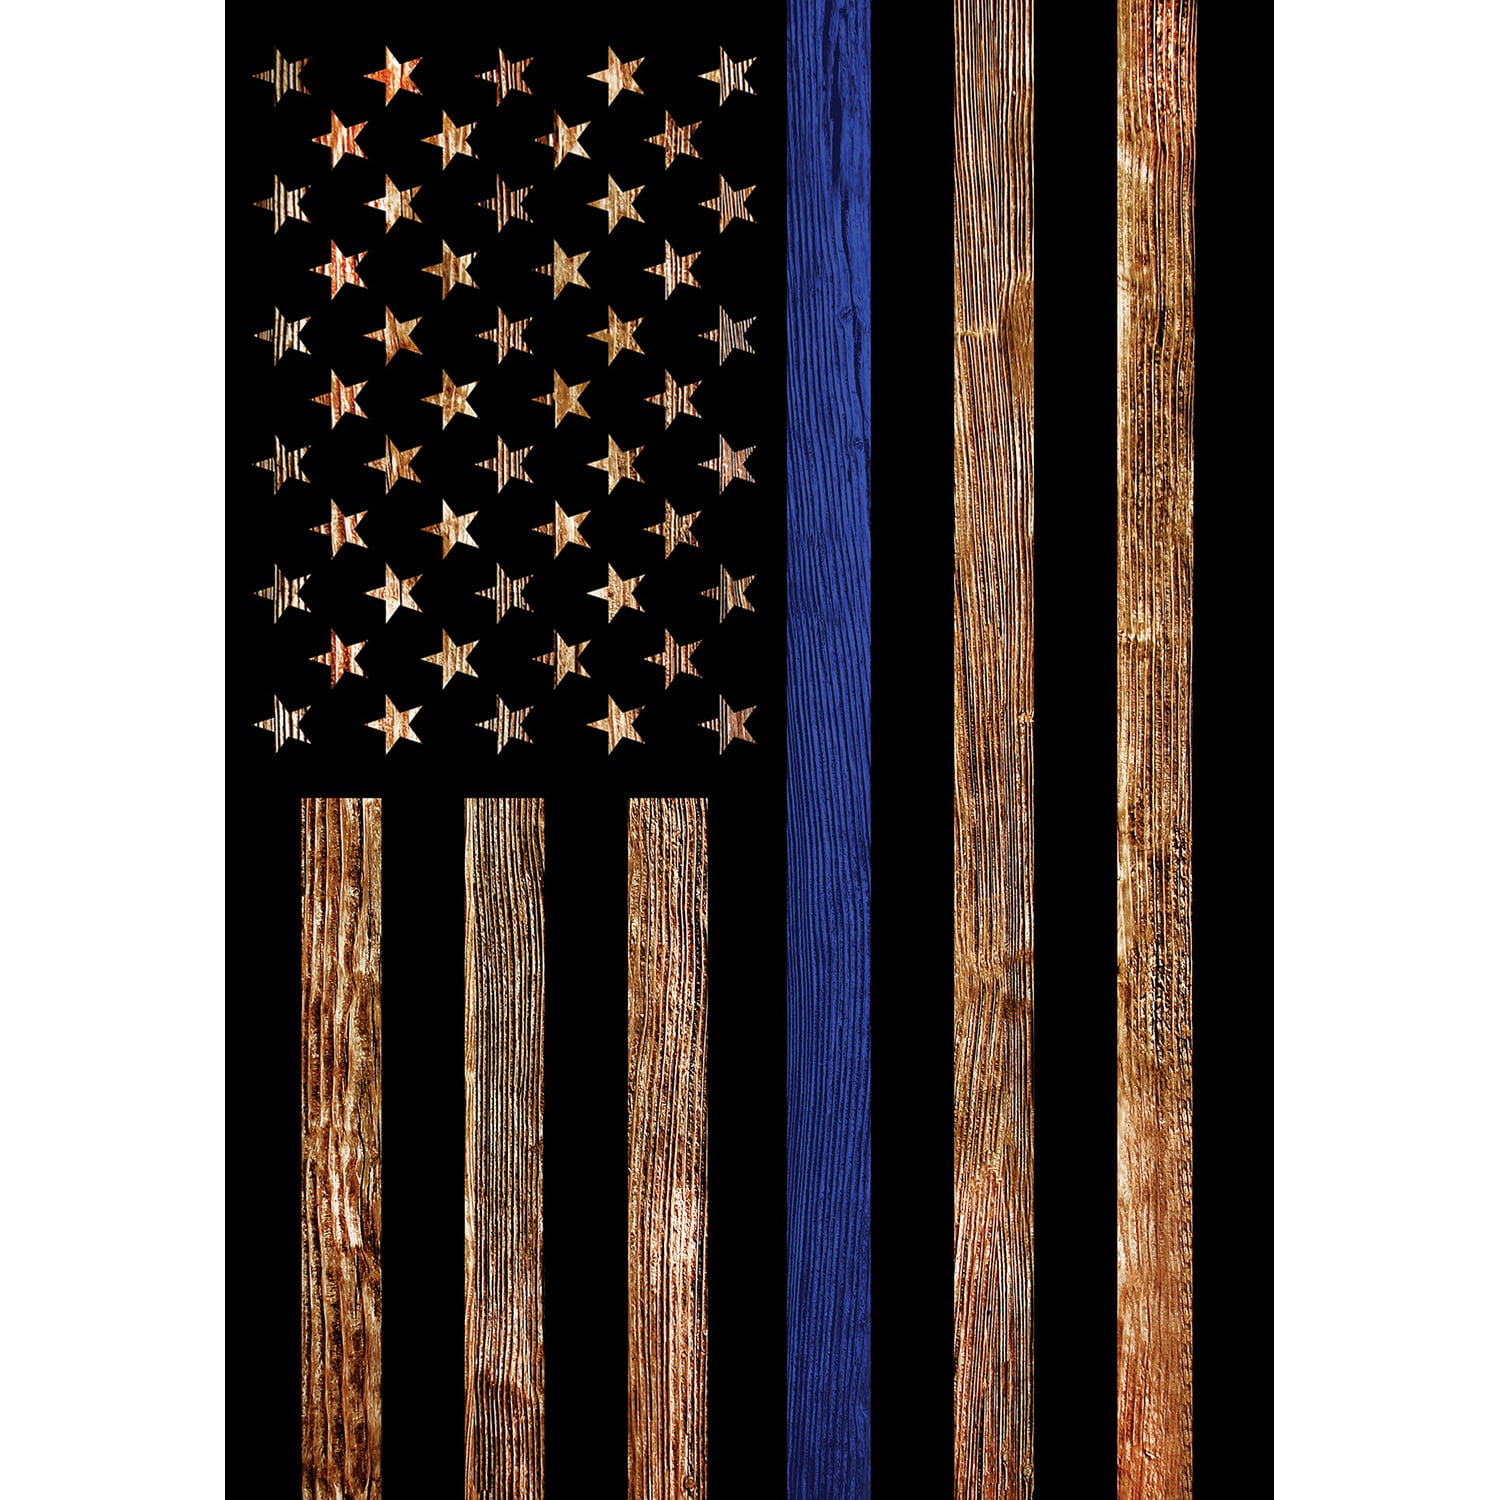 America Forever Louisiana State Flag 12.5 x 18 Inch Double Sided Outdoor  Yard Decorative USA Vintage Wood State of Louisiana Garden Flag, Made in  the USA 